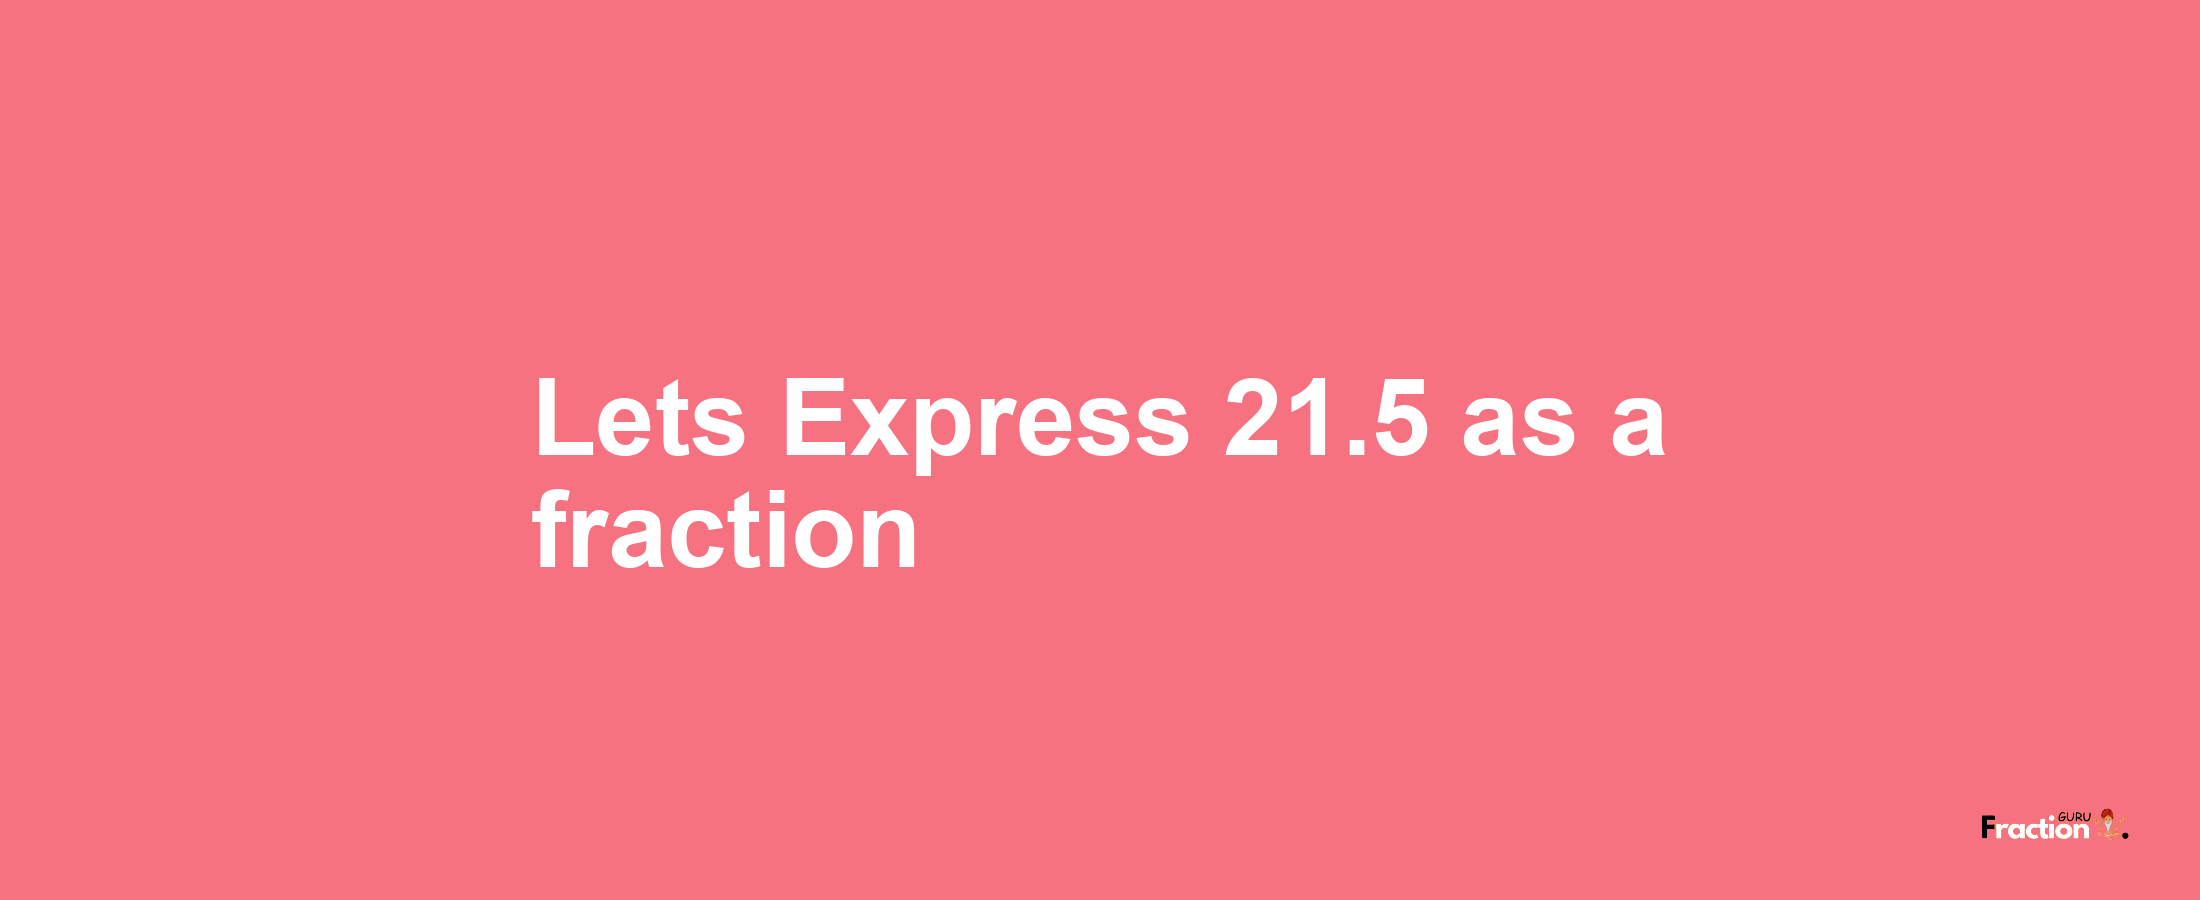 Lets Express 21.5 as afraction